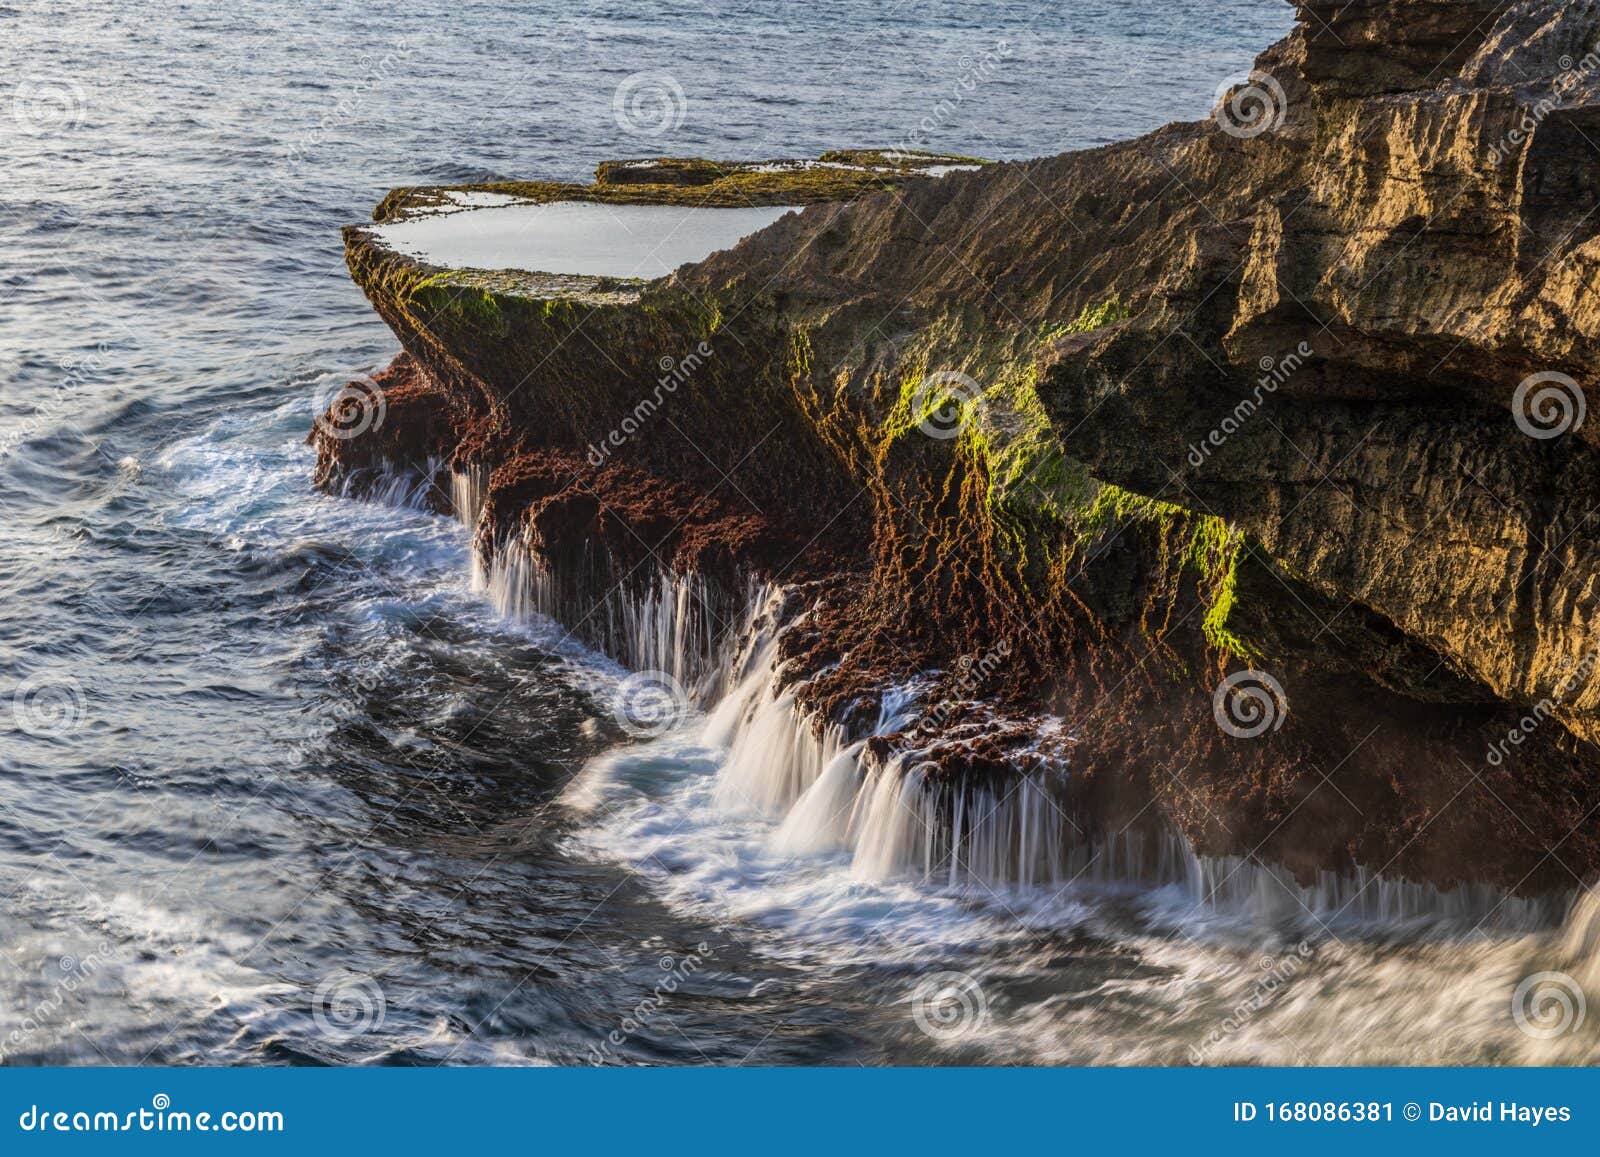 Rocky Outcrop Devil S Tear Nusa Lembongan Bali Tide Pool On Top Water Streaming From Rocks Into Ocean Stock Image Image Of Natural Environment 168086381